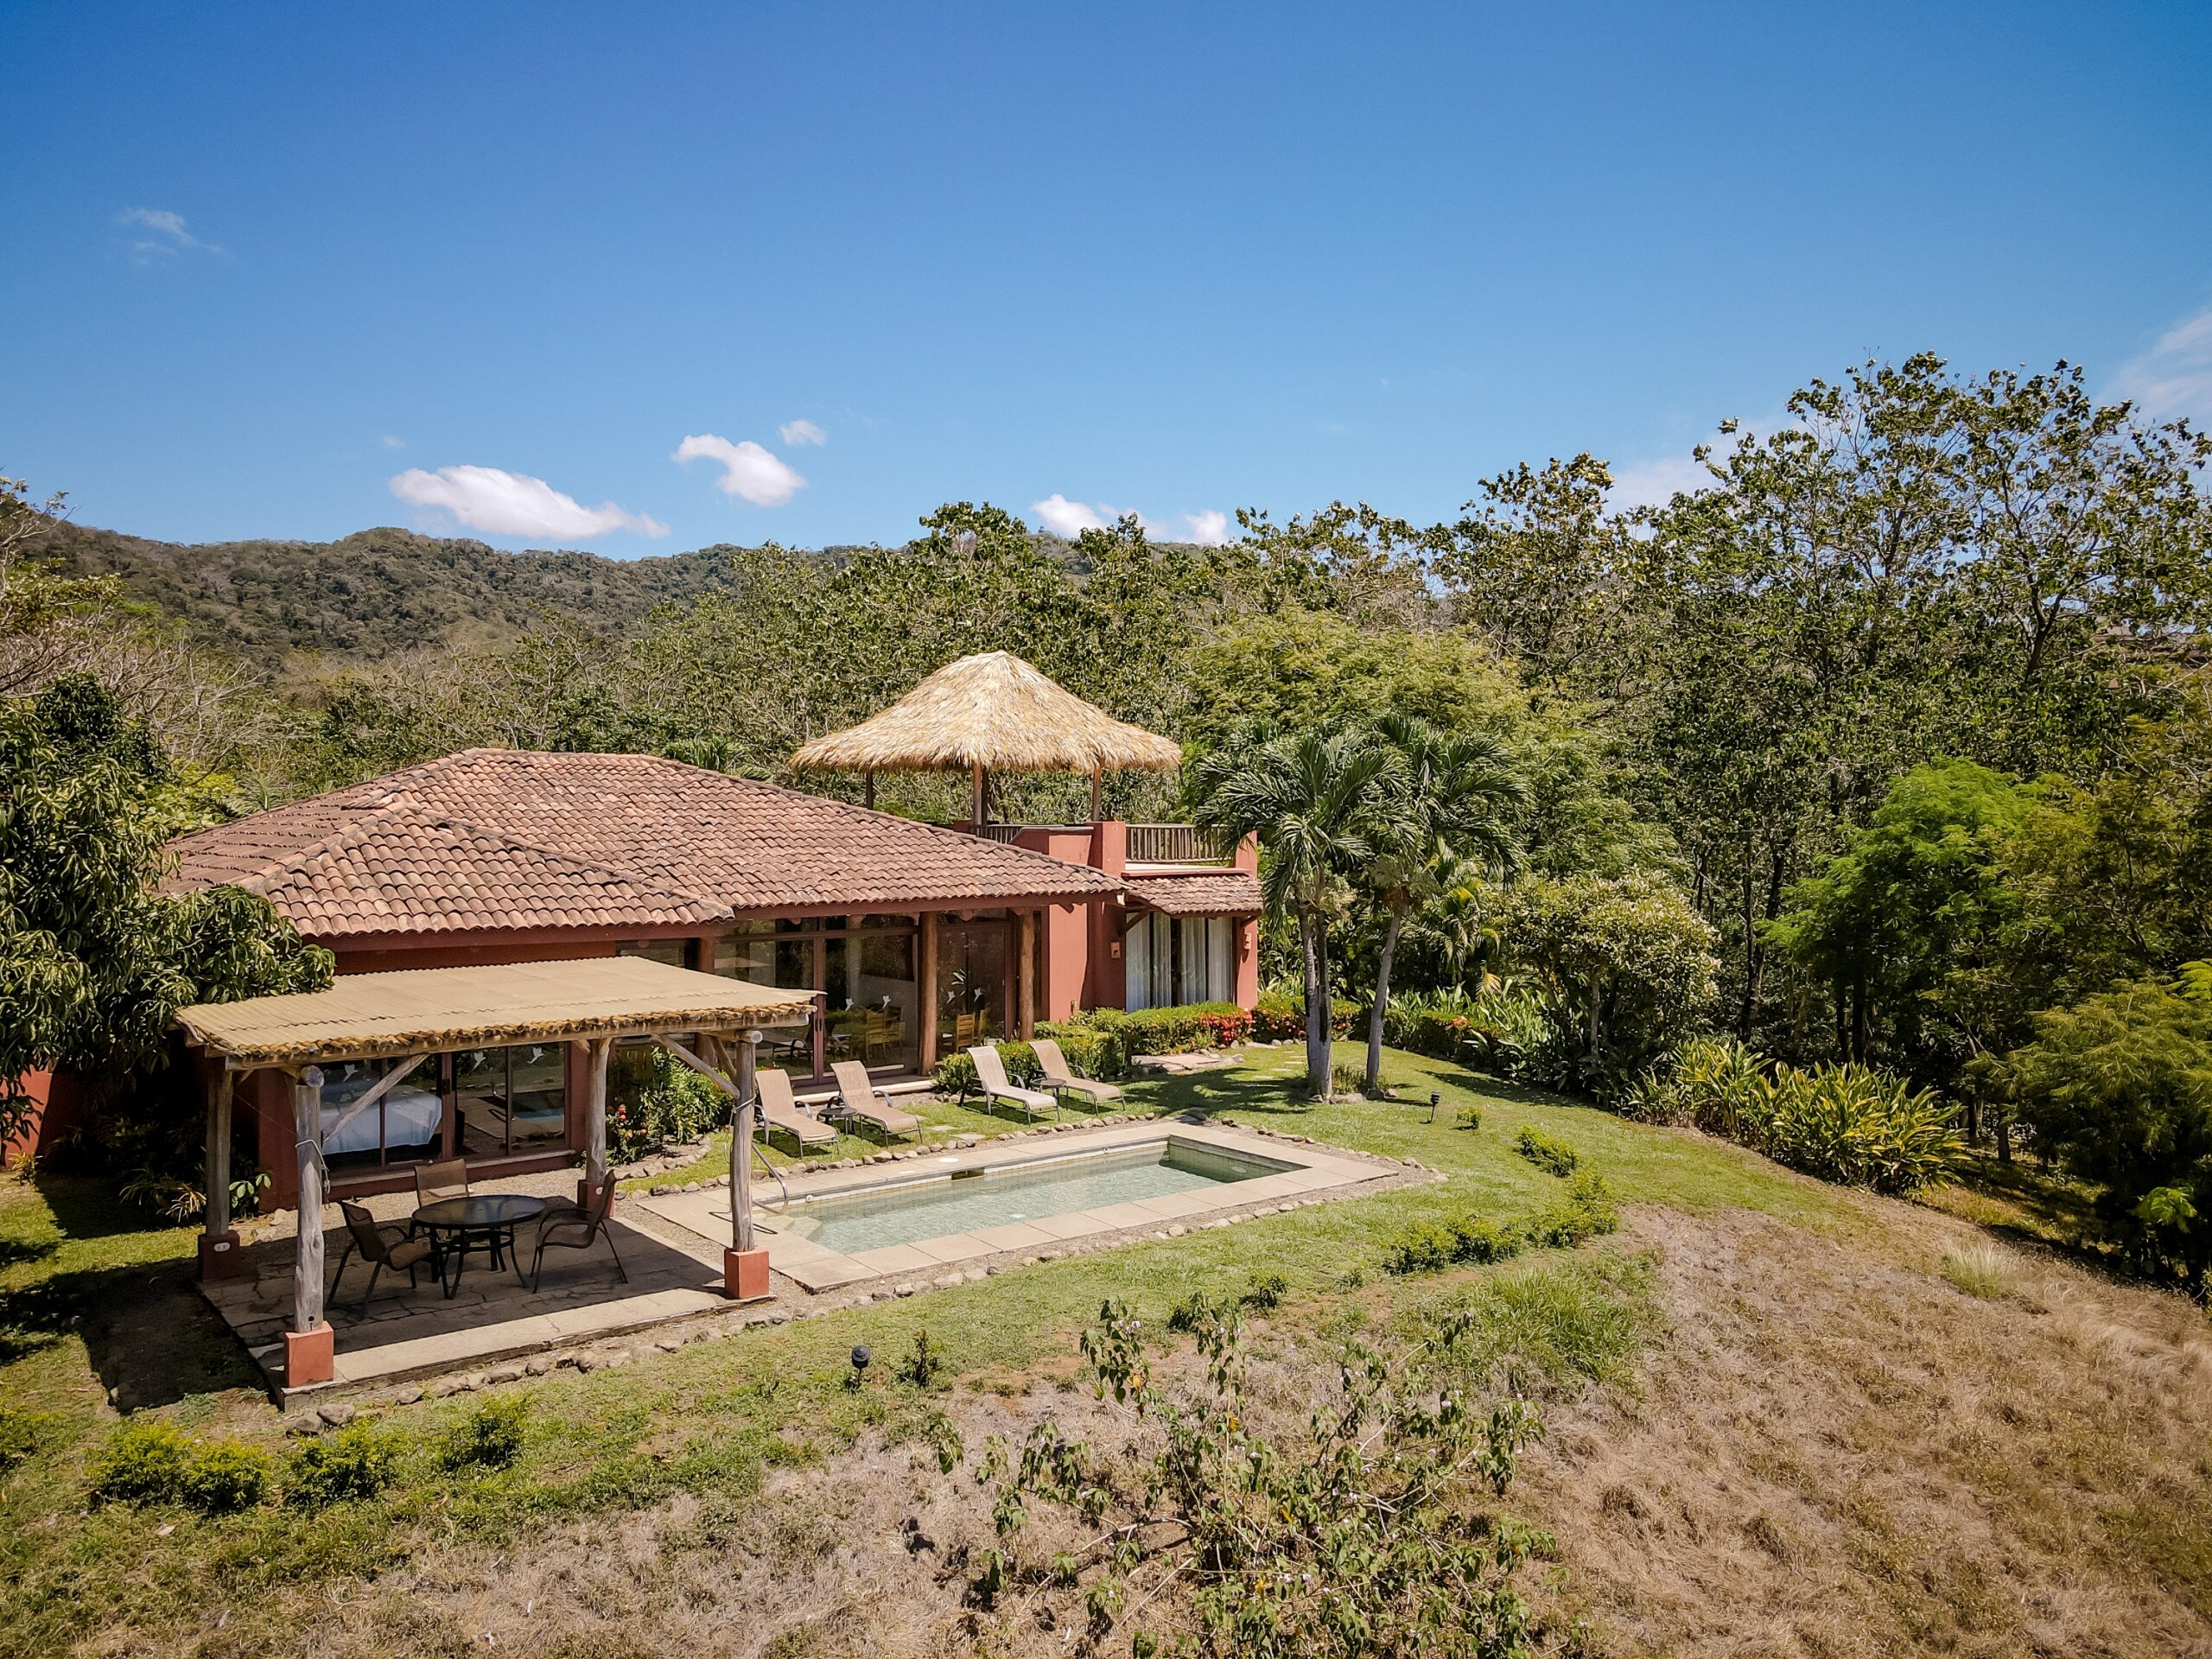 Property Image 2 - Amapola, a charming, private, and rustic-style 3 bedroom villa in the middle of nature